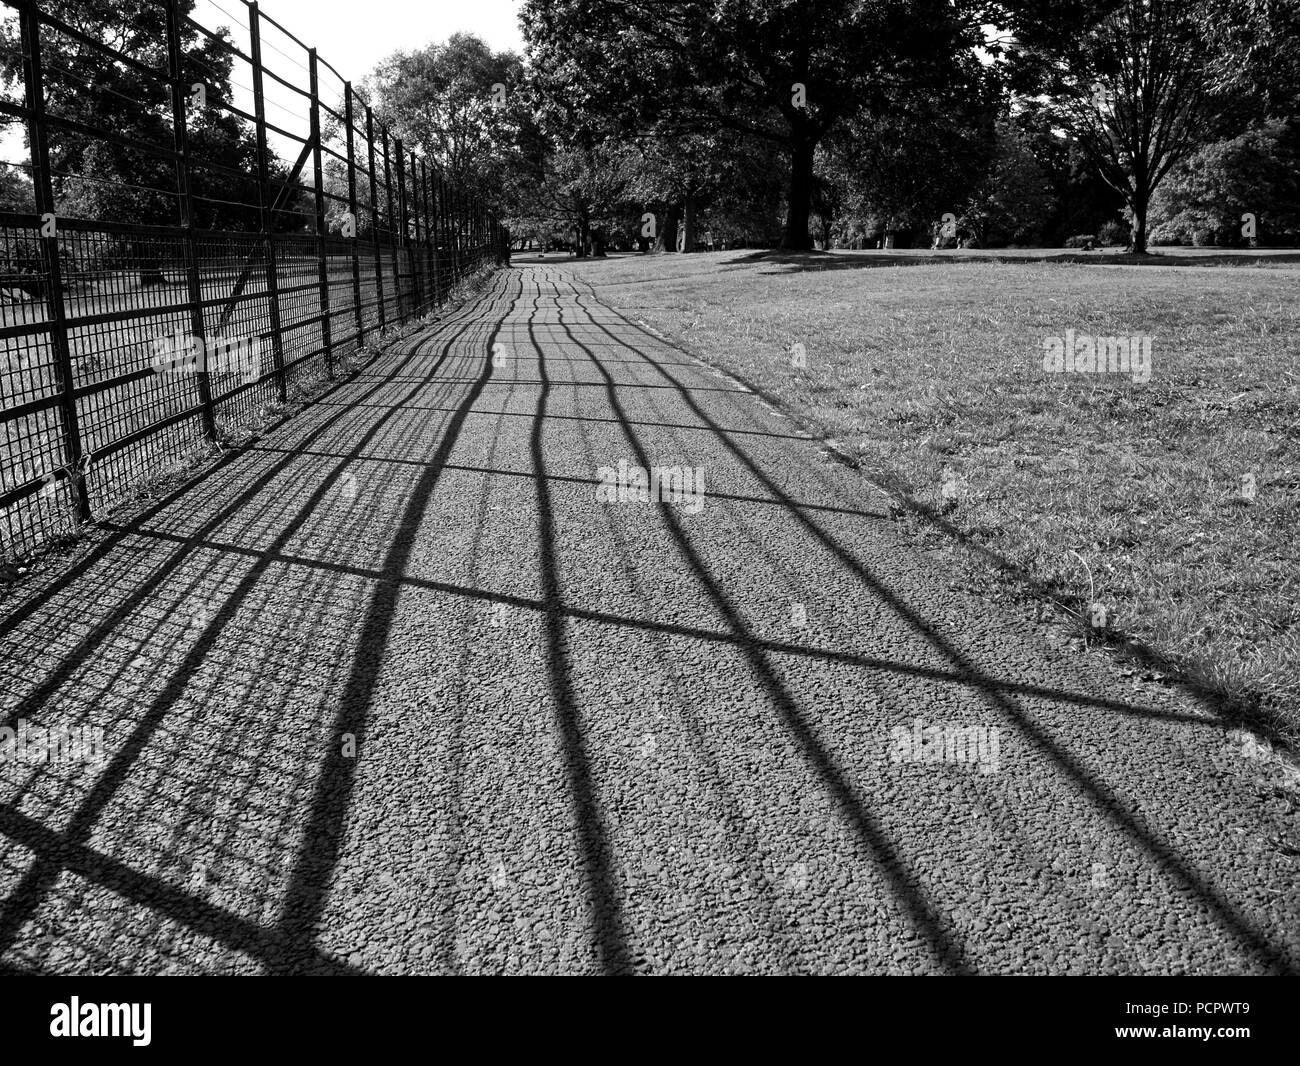 Black and white perspective view of long iron fence at a park. The fence cast shadow on a asphalted footpath. Stock Photo